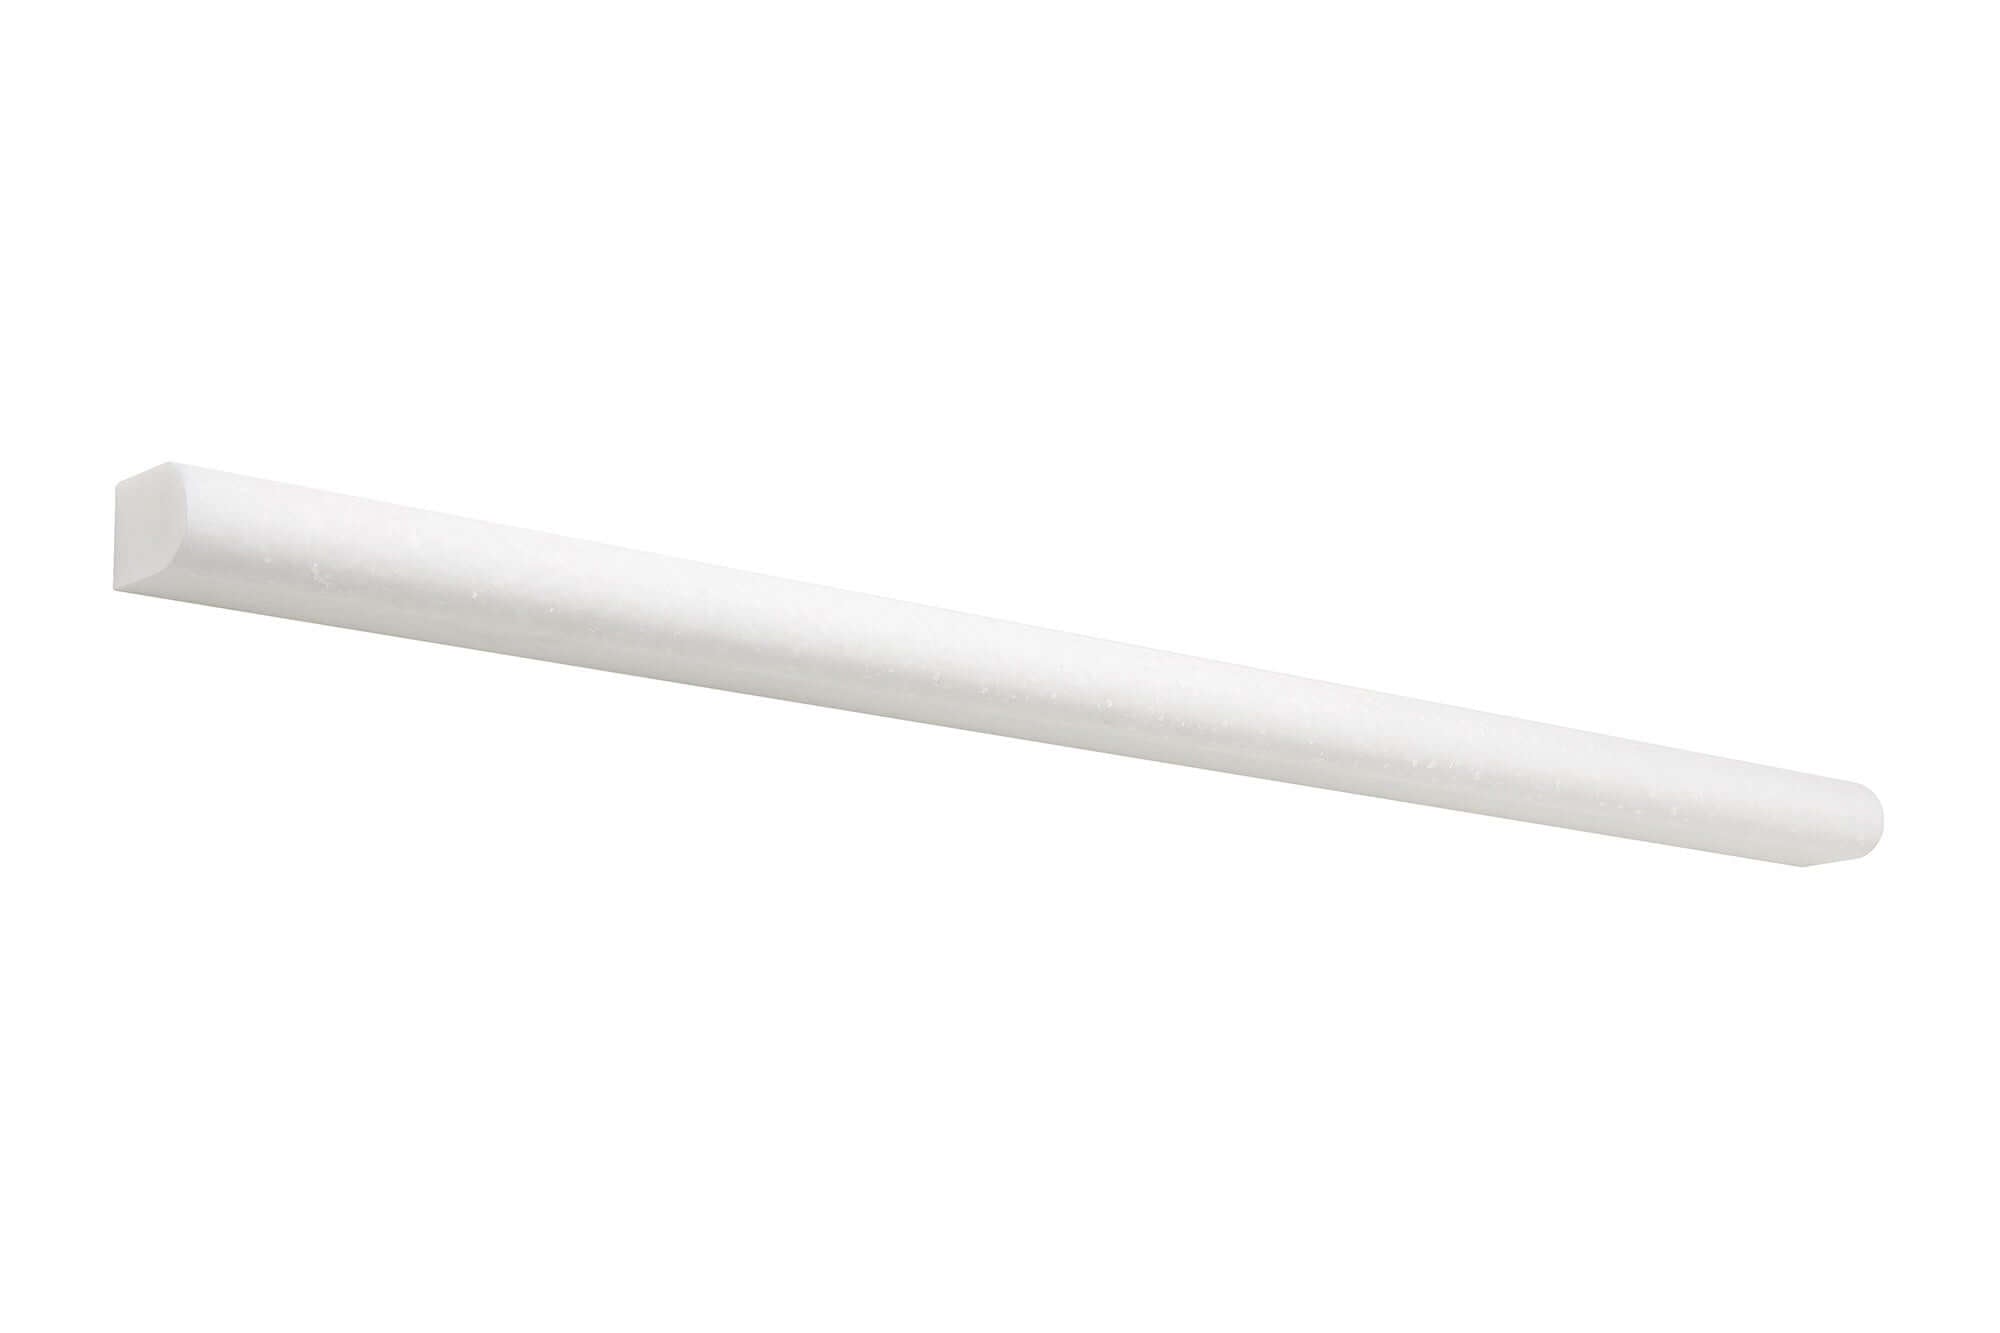 Thassos White Marble 1/2 x 12 Pencil Liner Polished